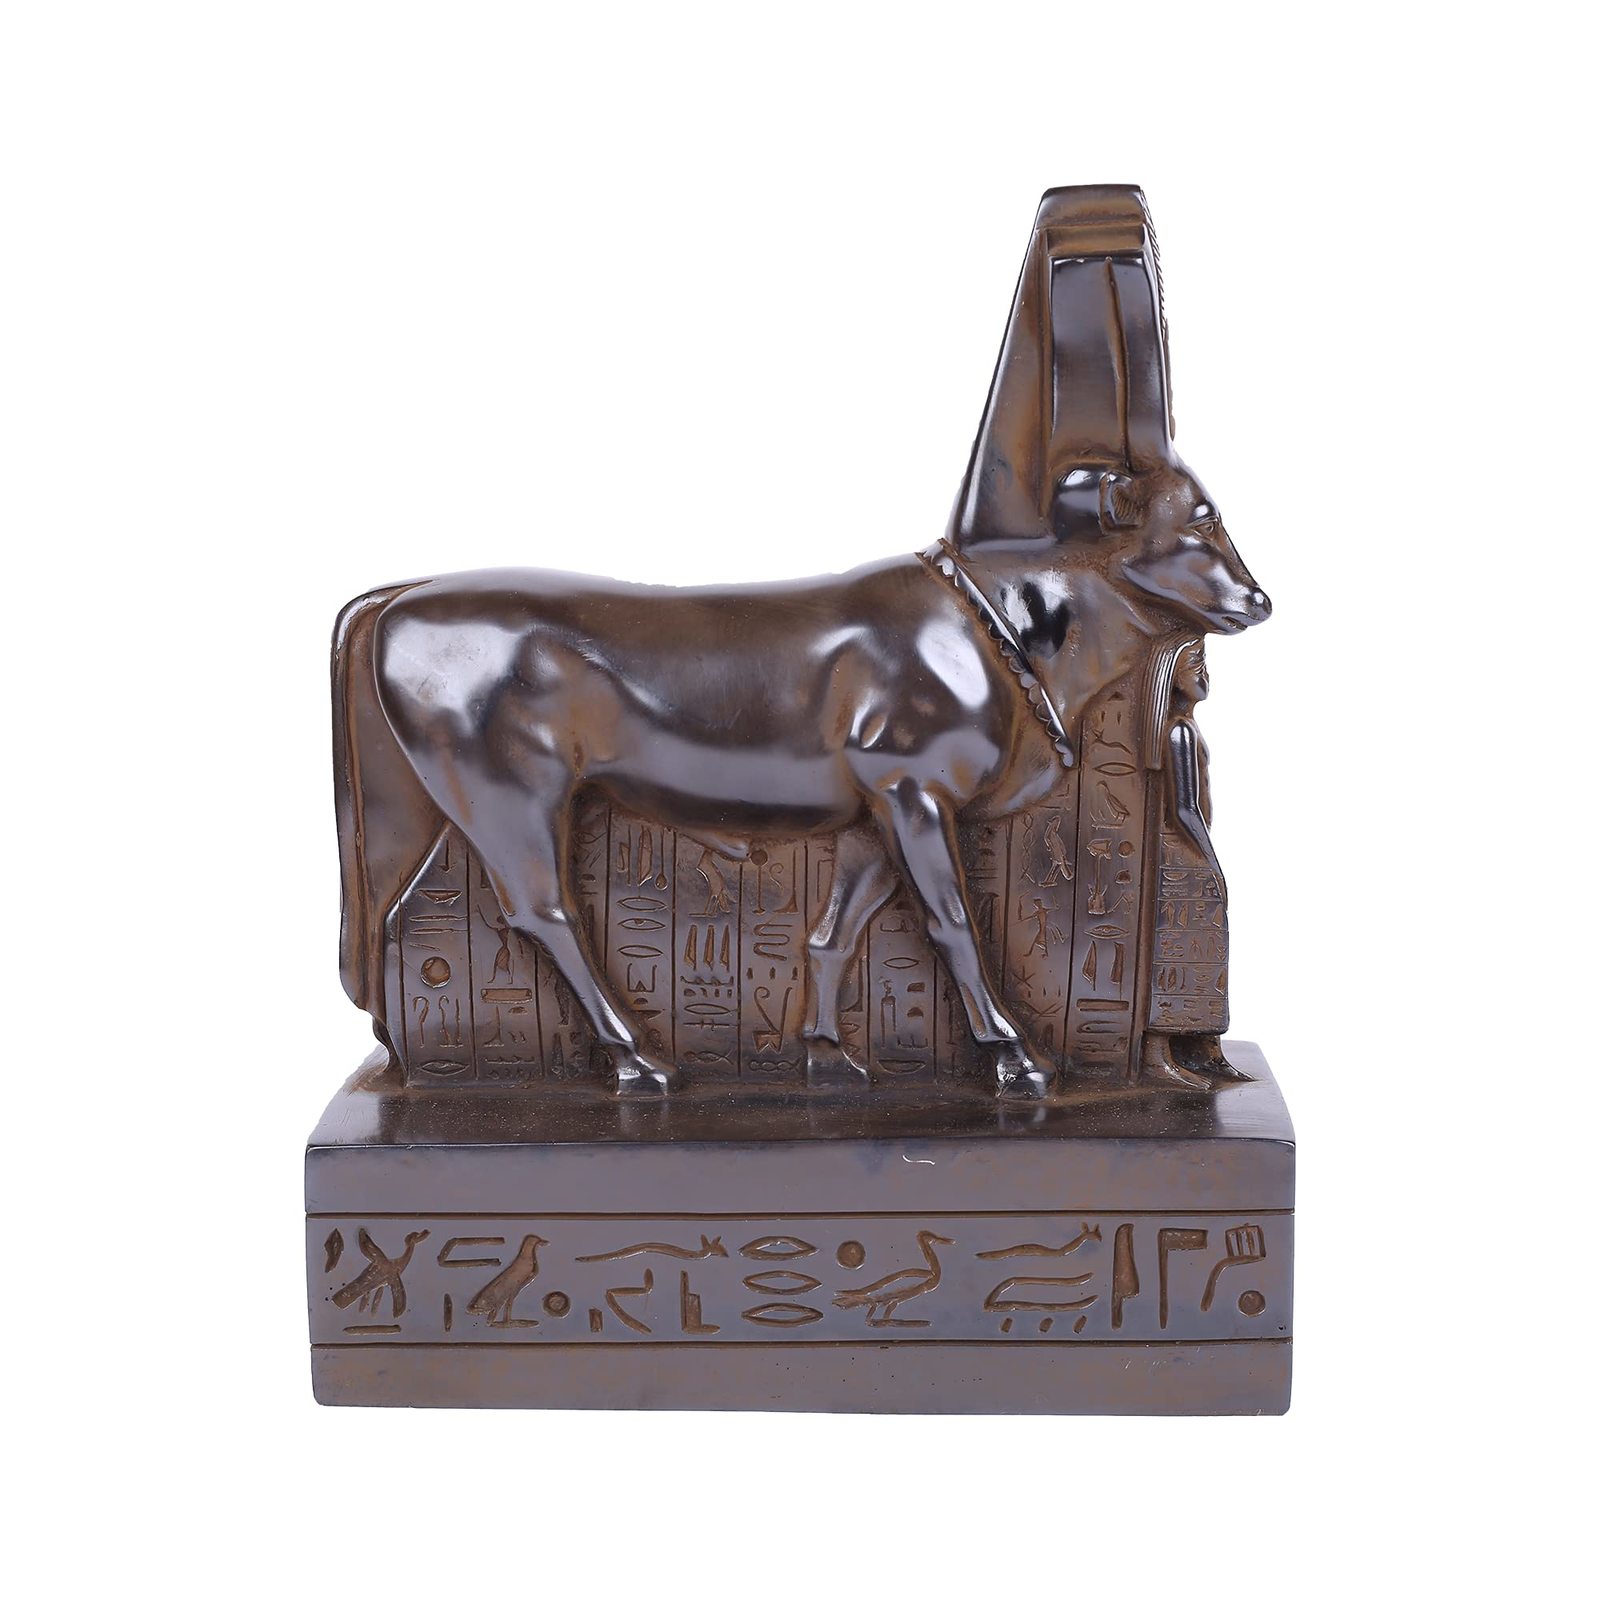 Statue of Egyptian Goddess Hathor in the form of a cow protecting the government